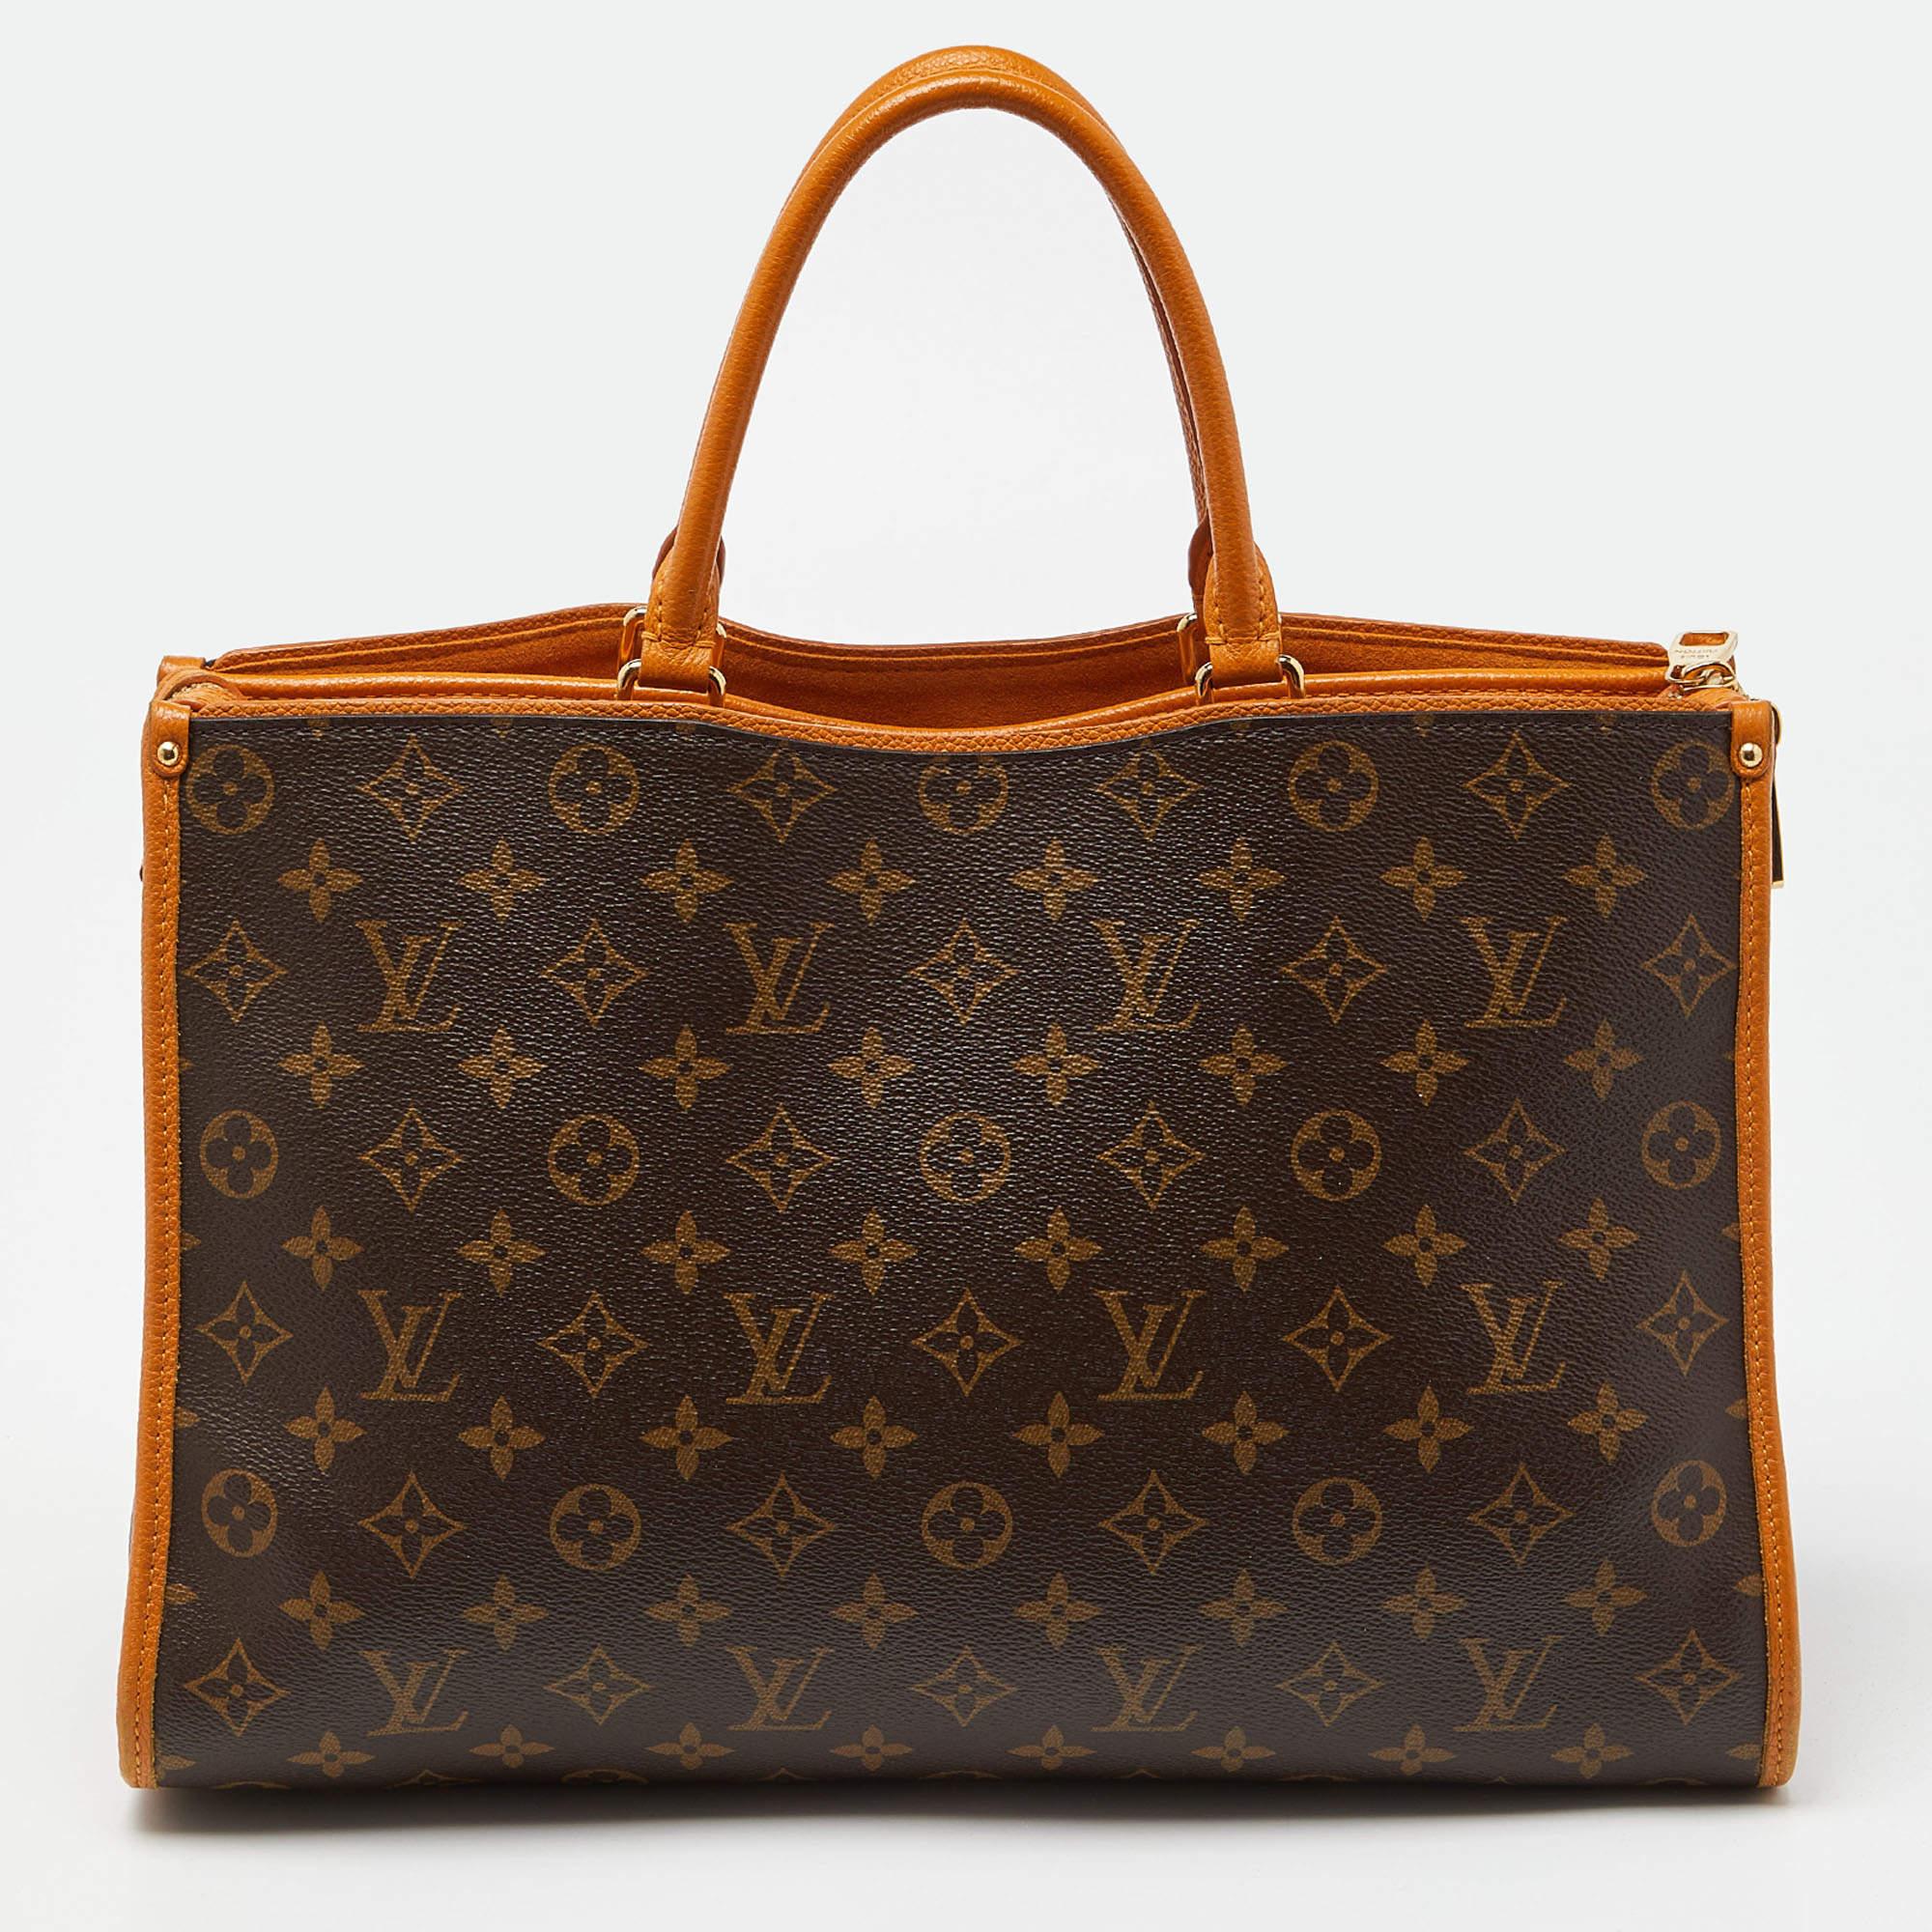 Louis Vuitton's handbags are popular owing to their high style and functionality. This Popincourt MM bag, like all their designs, is durable and stylish. Exuding a fine finish, the bag is designed to give a luxurious experience. The interior has